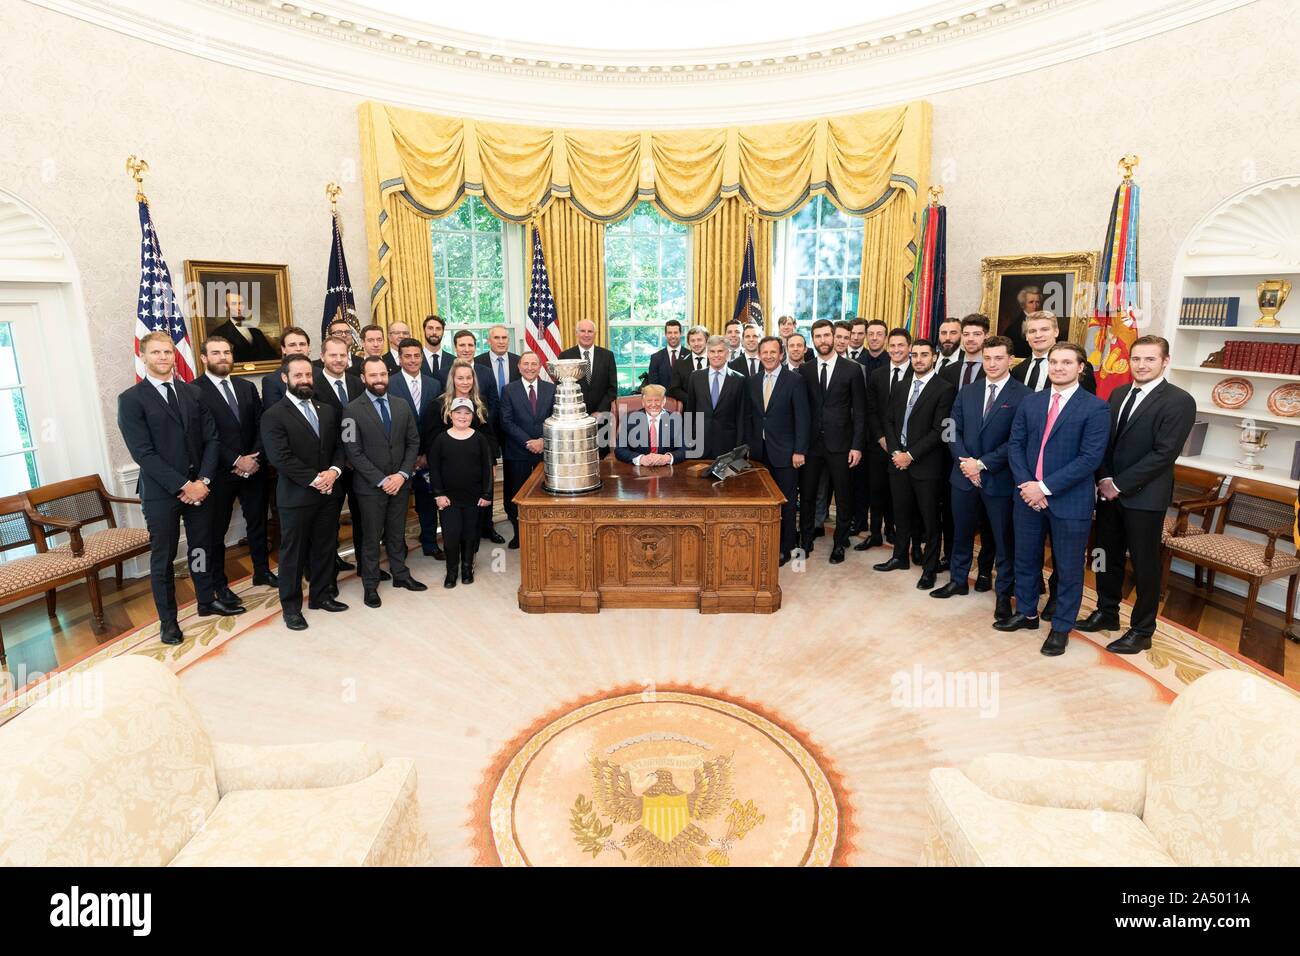 U.S President Donald Trump, center, poses with members of the 2019 Stanley Cup Championship professional ice hockey team, the St. Louis Blues, in the Oval Office of the White House October 15, 2019 in Washington, DC. Stock Photo